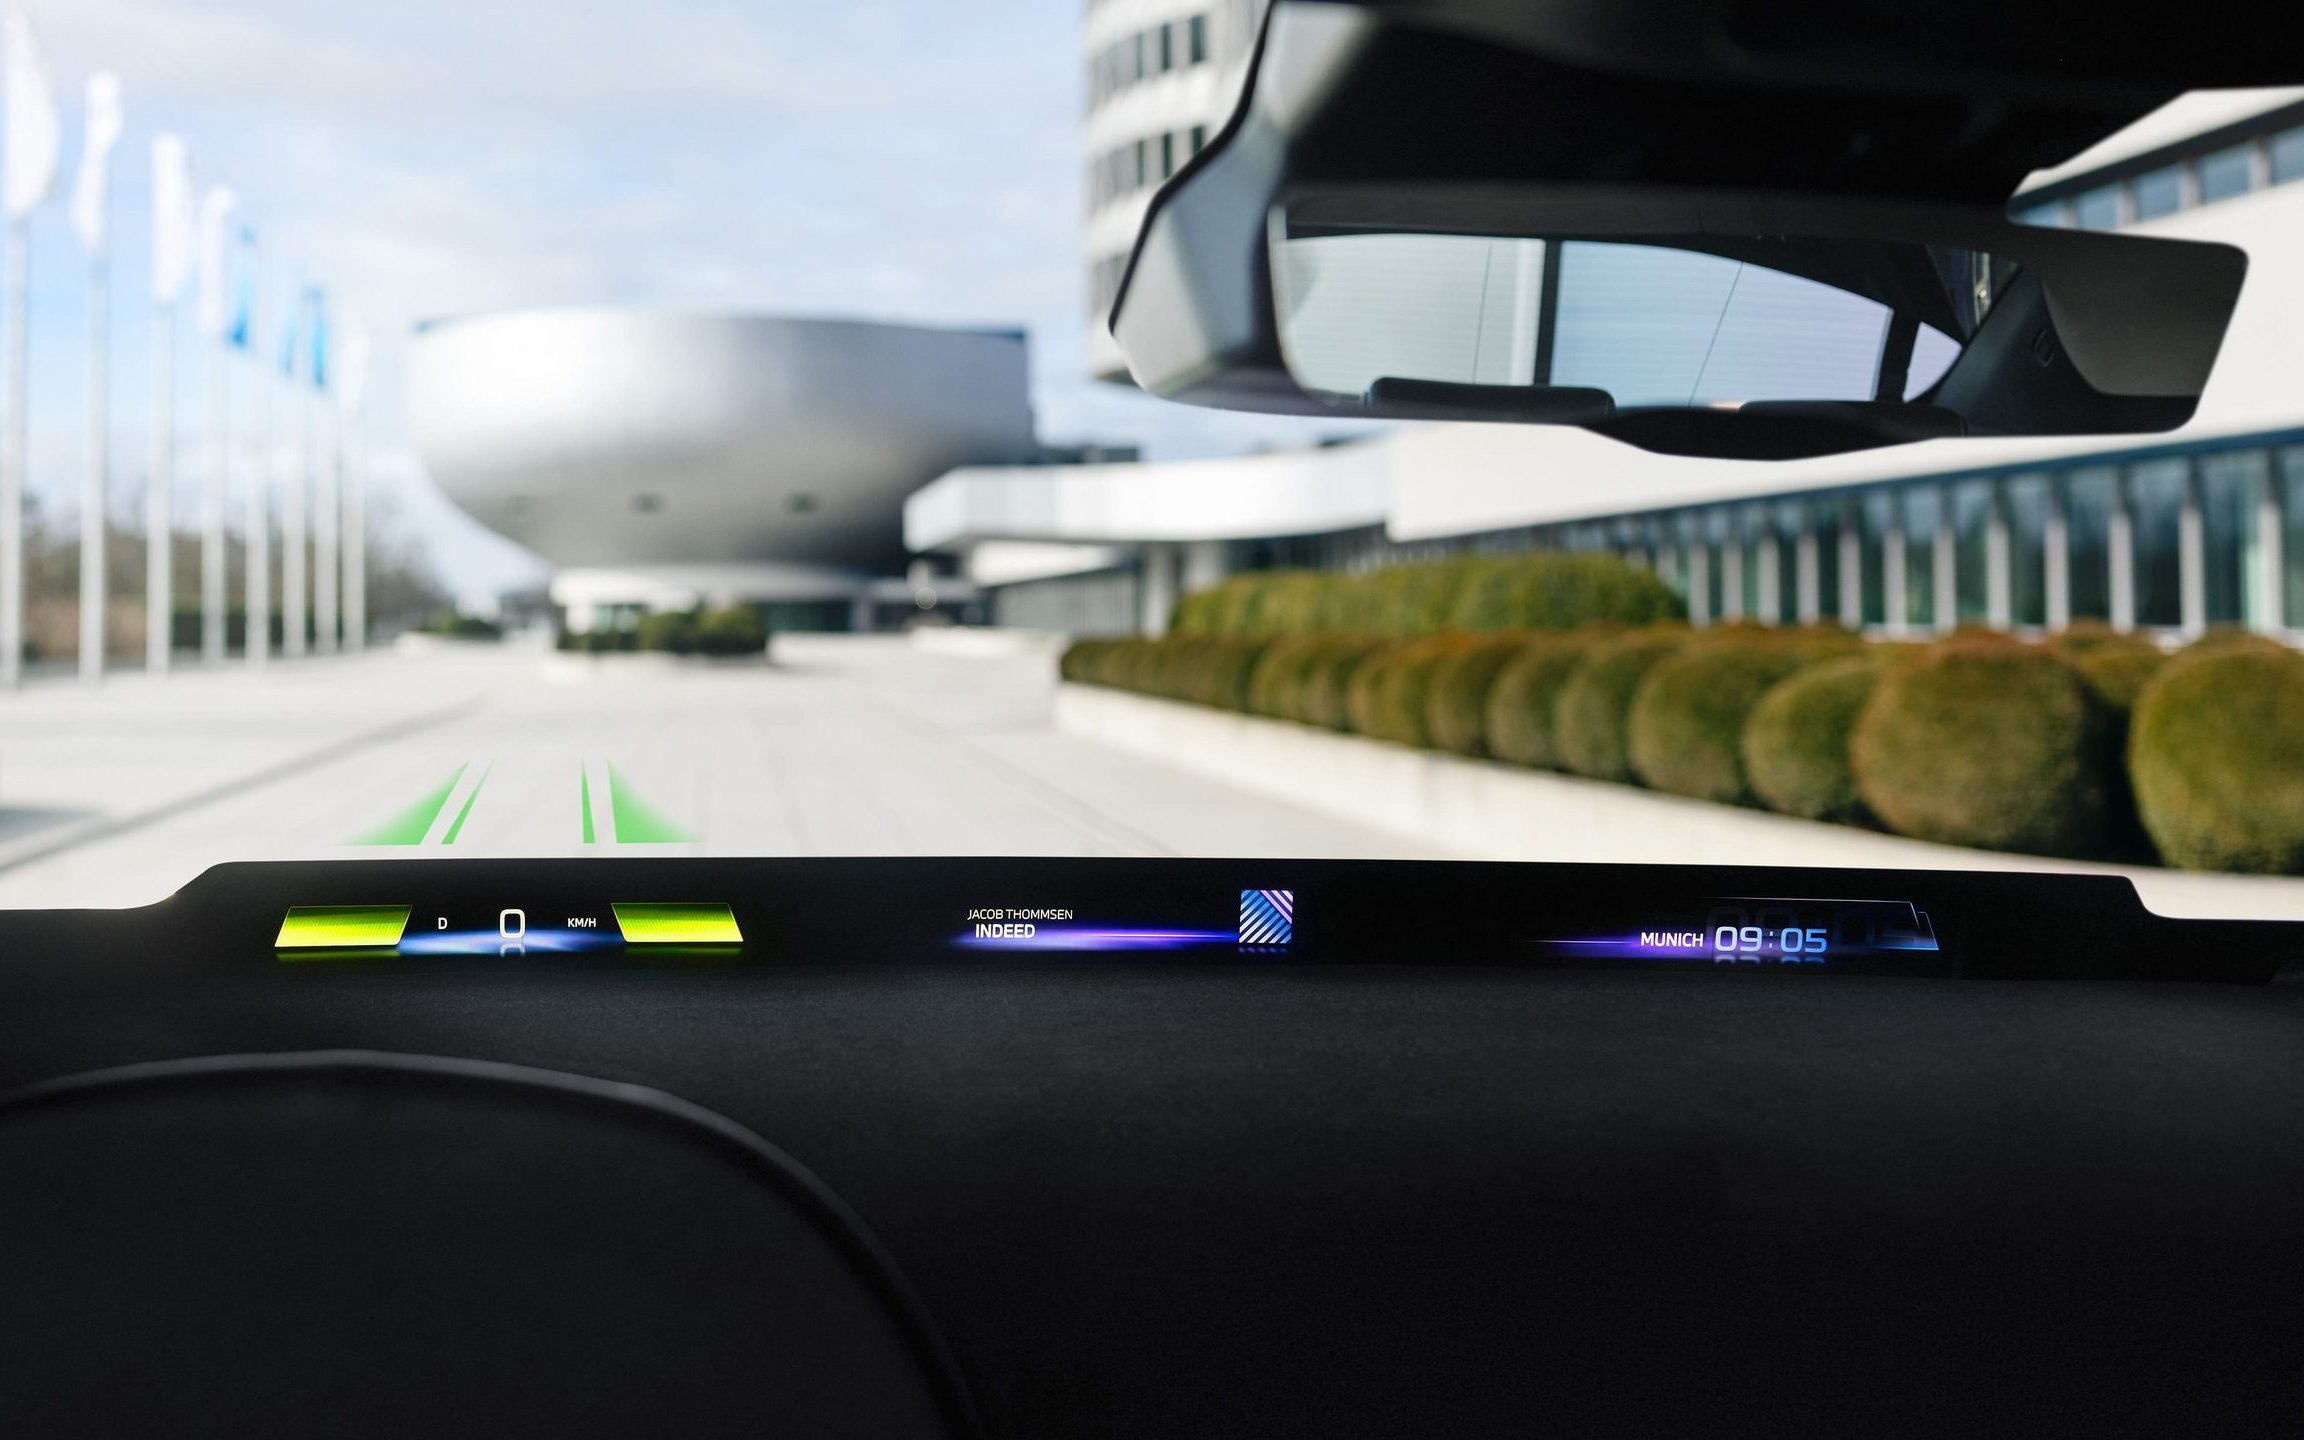 BMW Panoramic Vision head-up display on windscreen